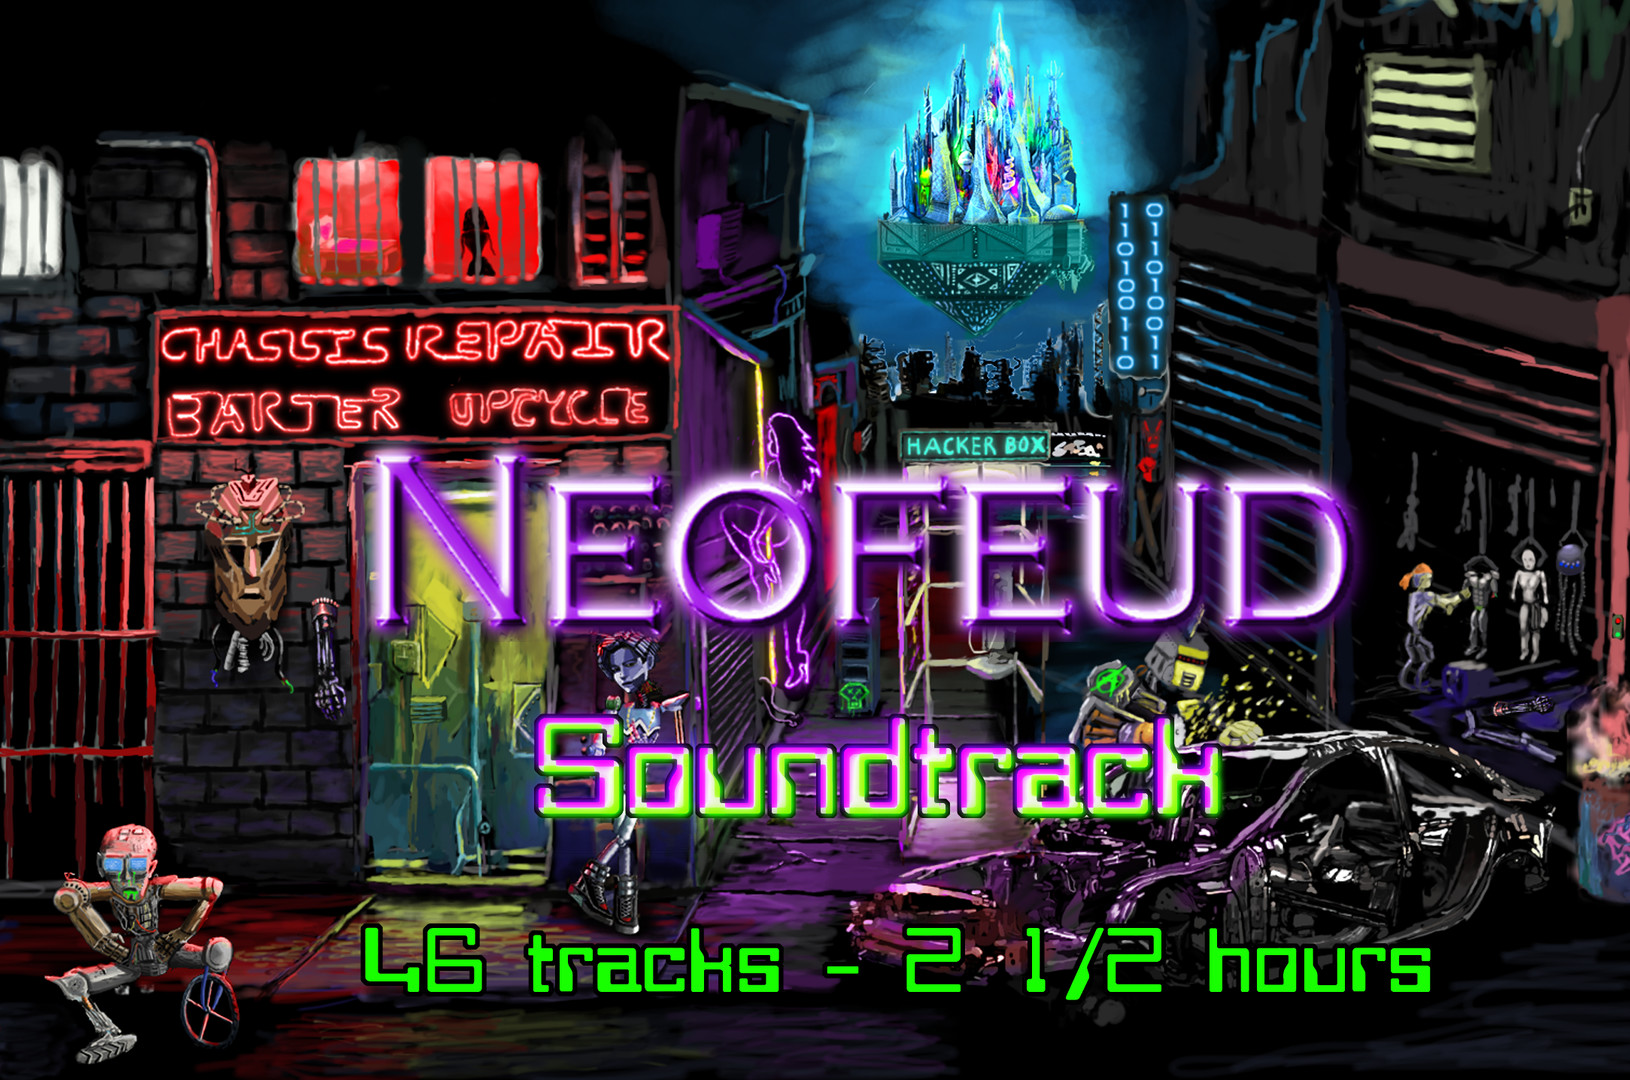 Steam 上的Neofeud - Soundtrack